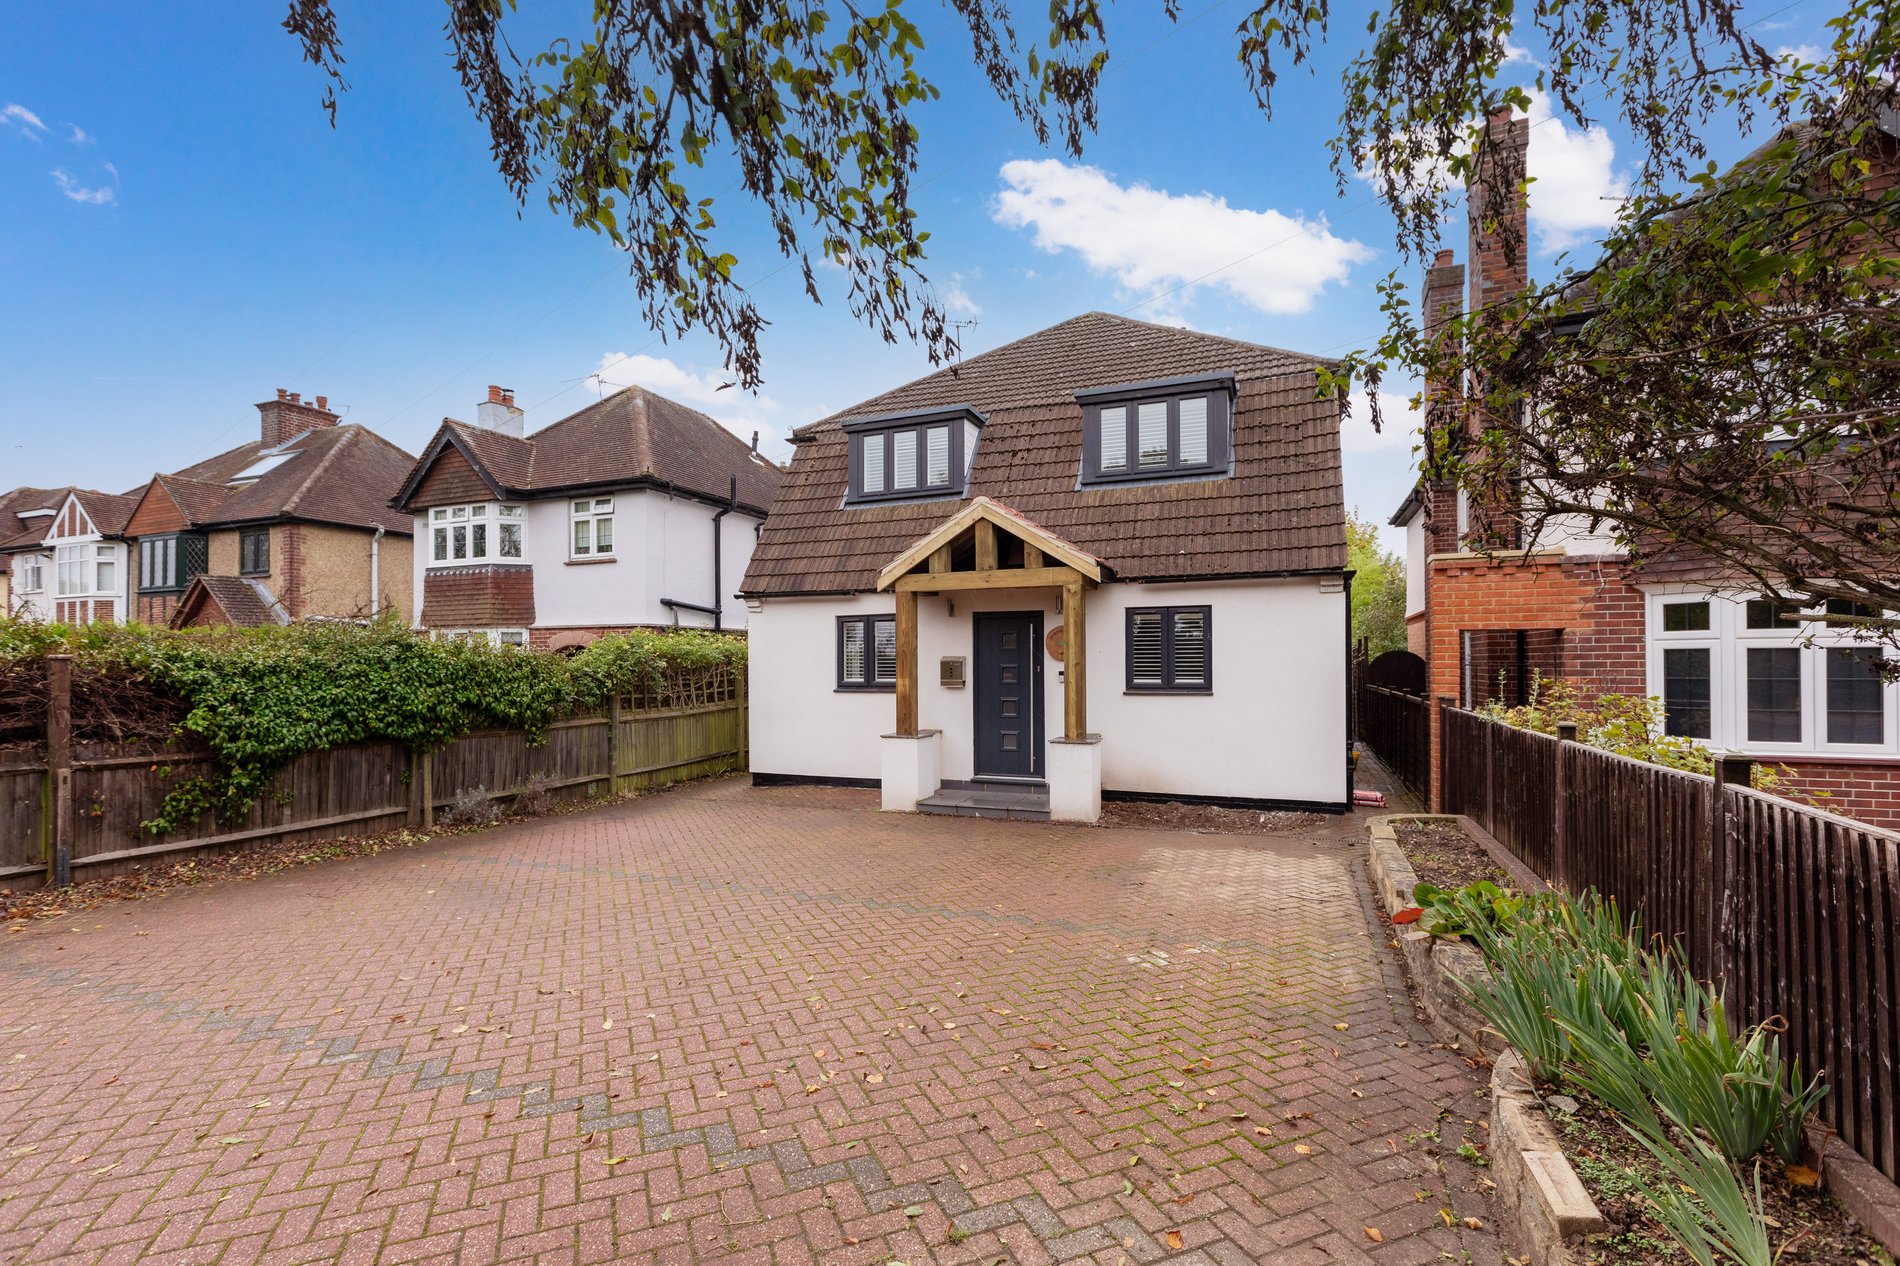 4 bed detached house for sale in Windsor Road, Maidenhead - Property Image 1